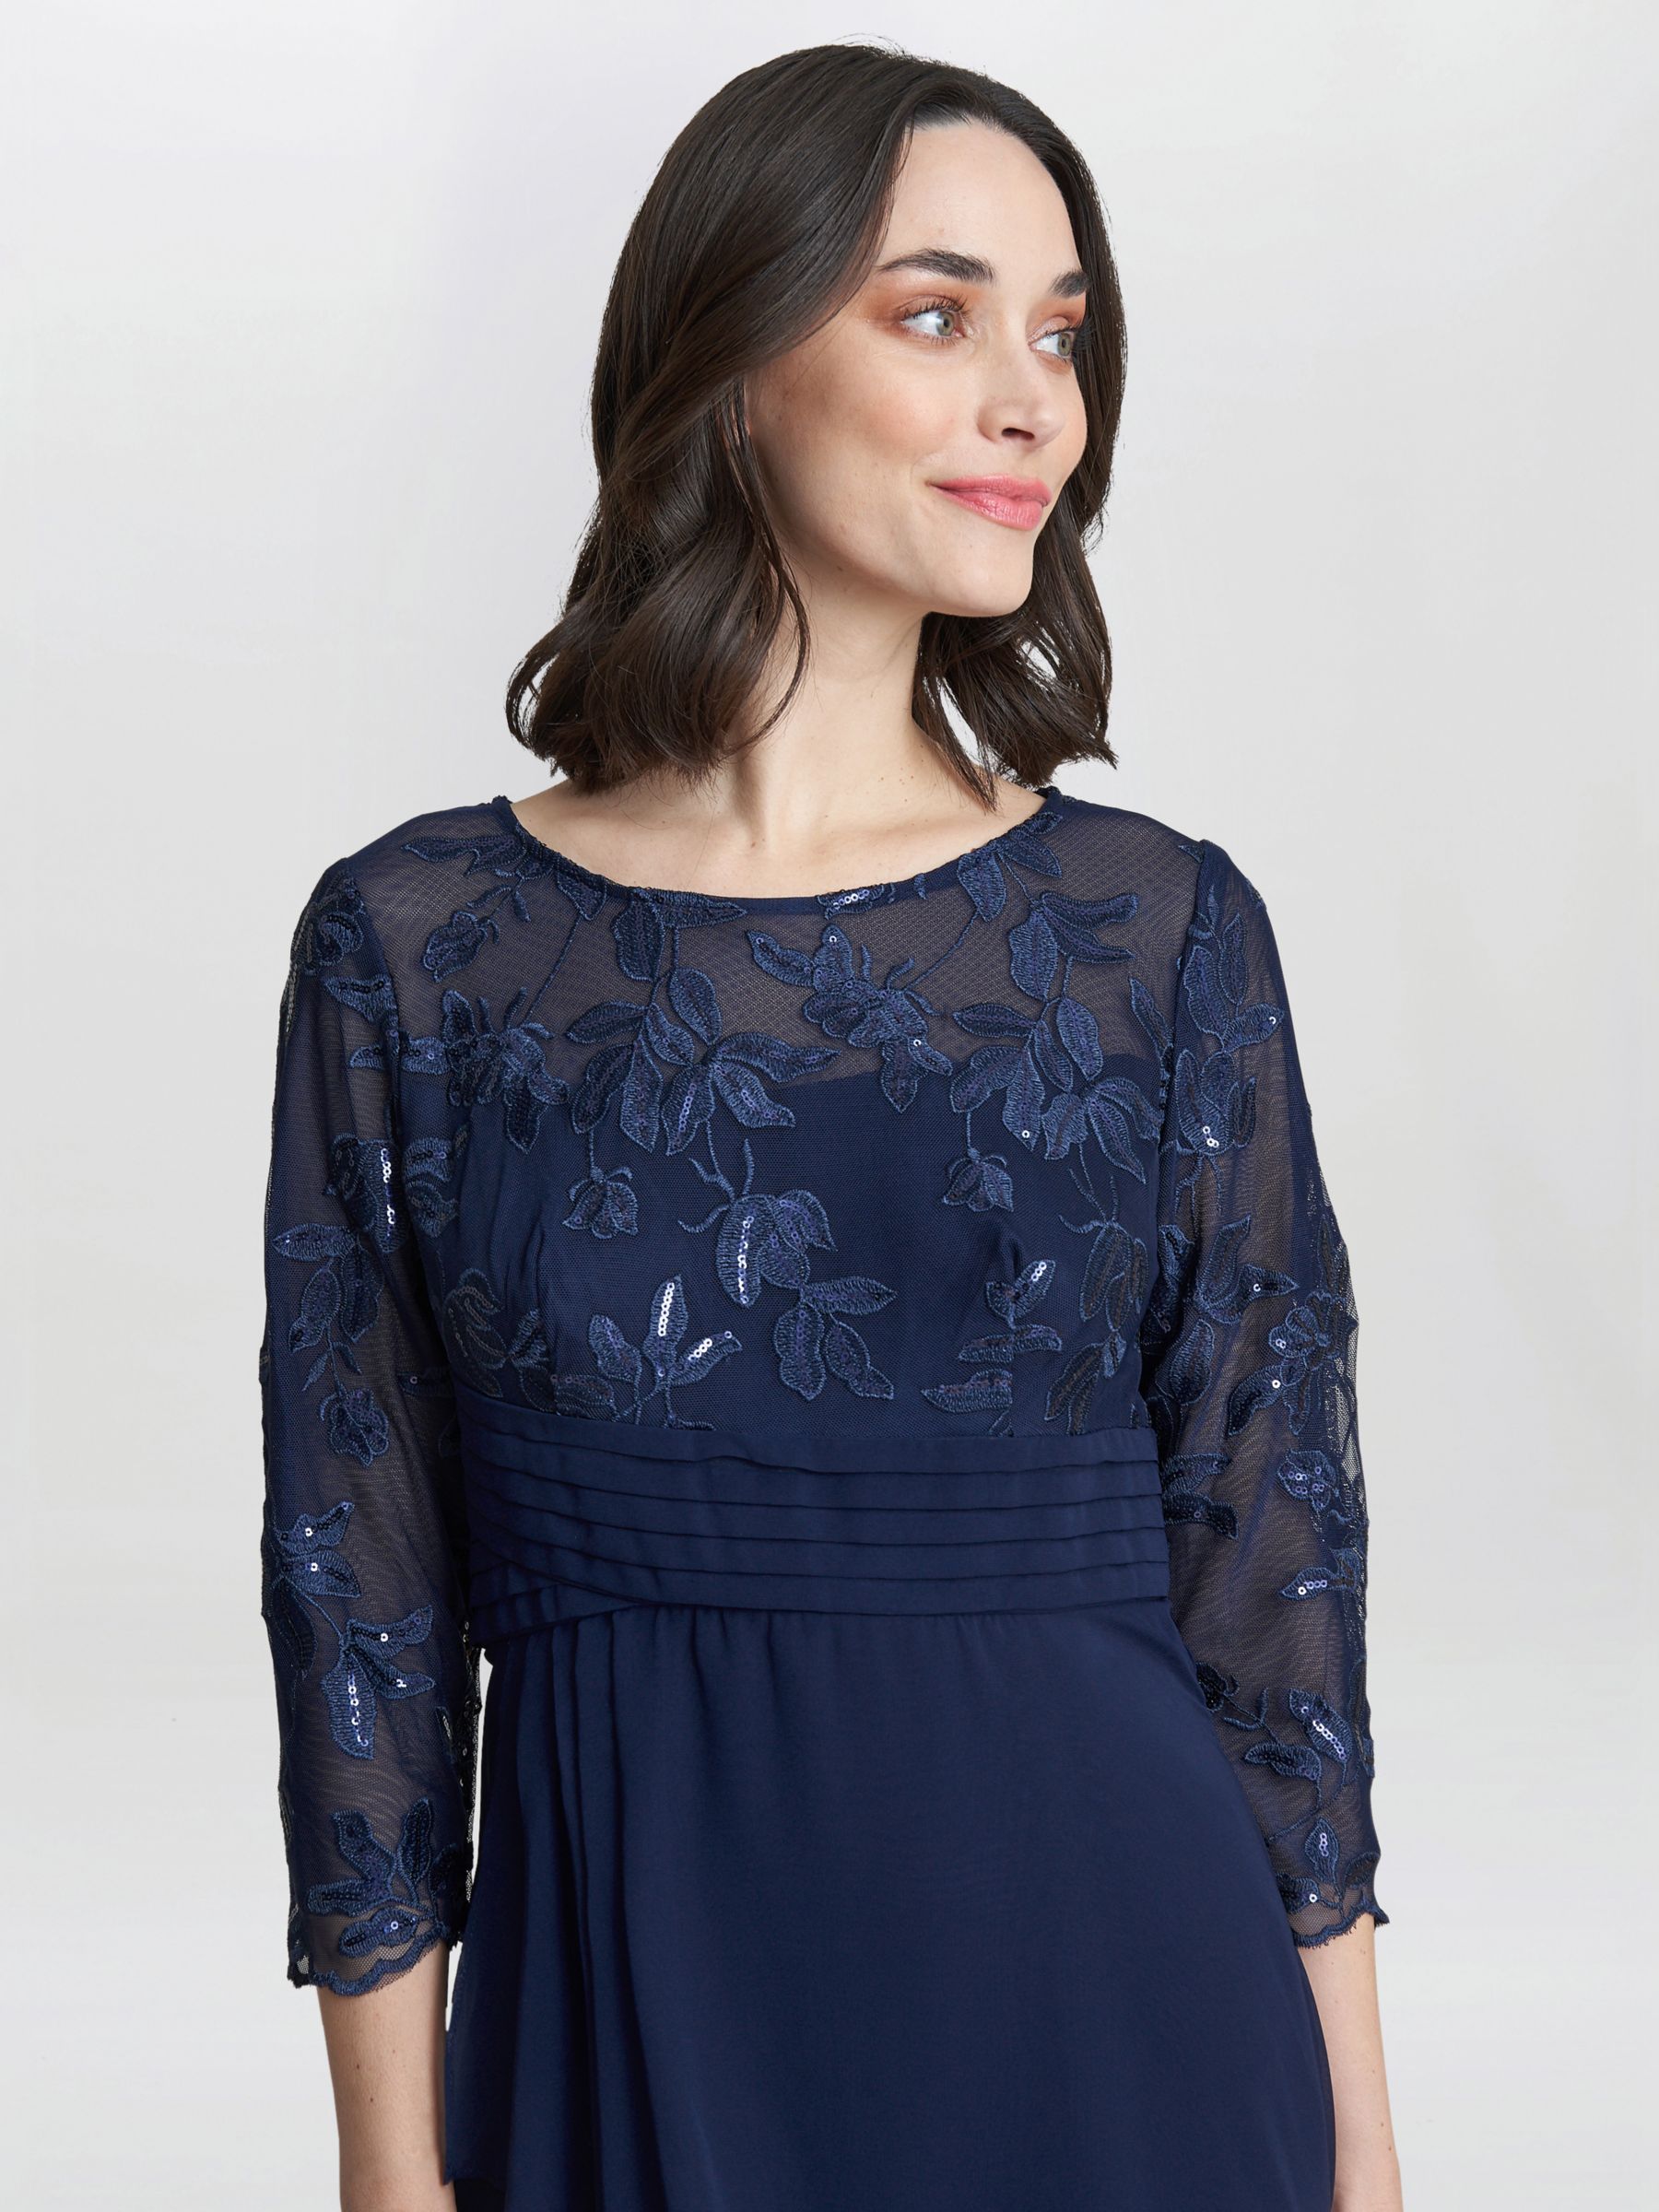 Gina Bacconi Petite Thandie Embroidered Bodice Dress, Navy, 8